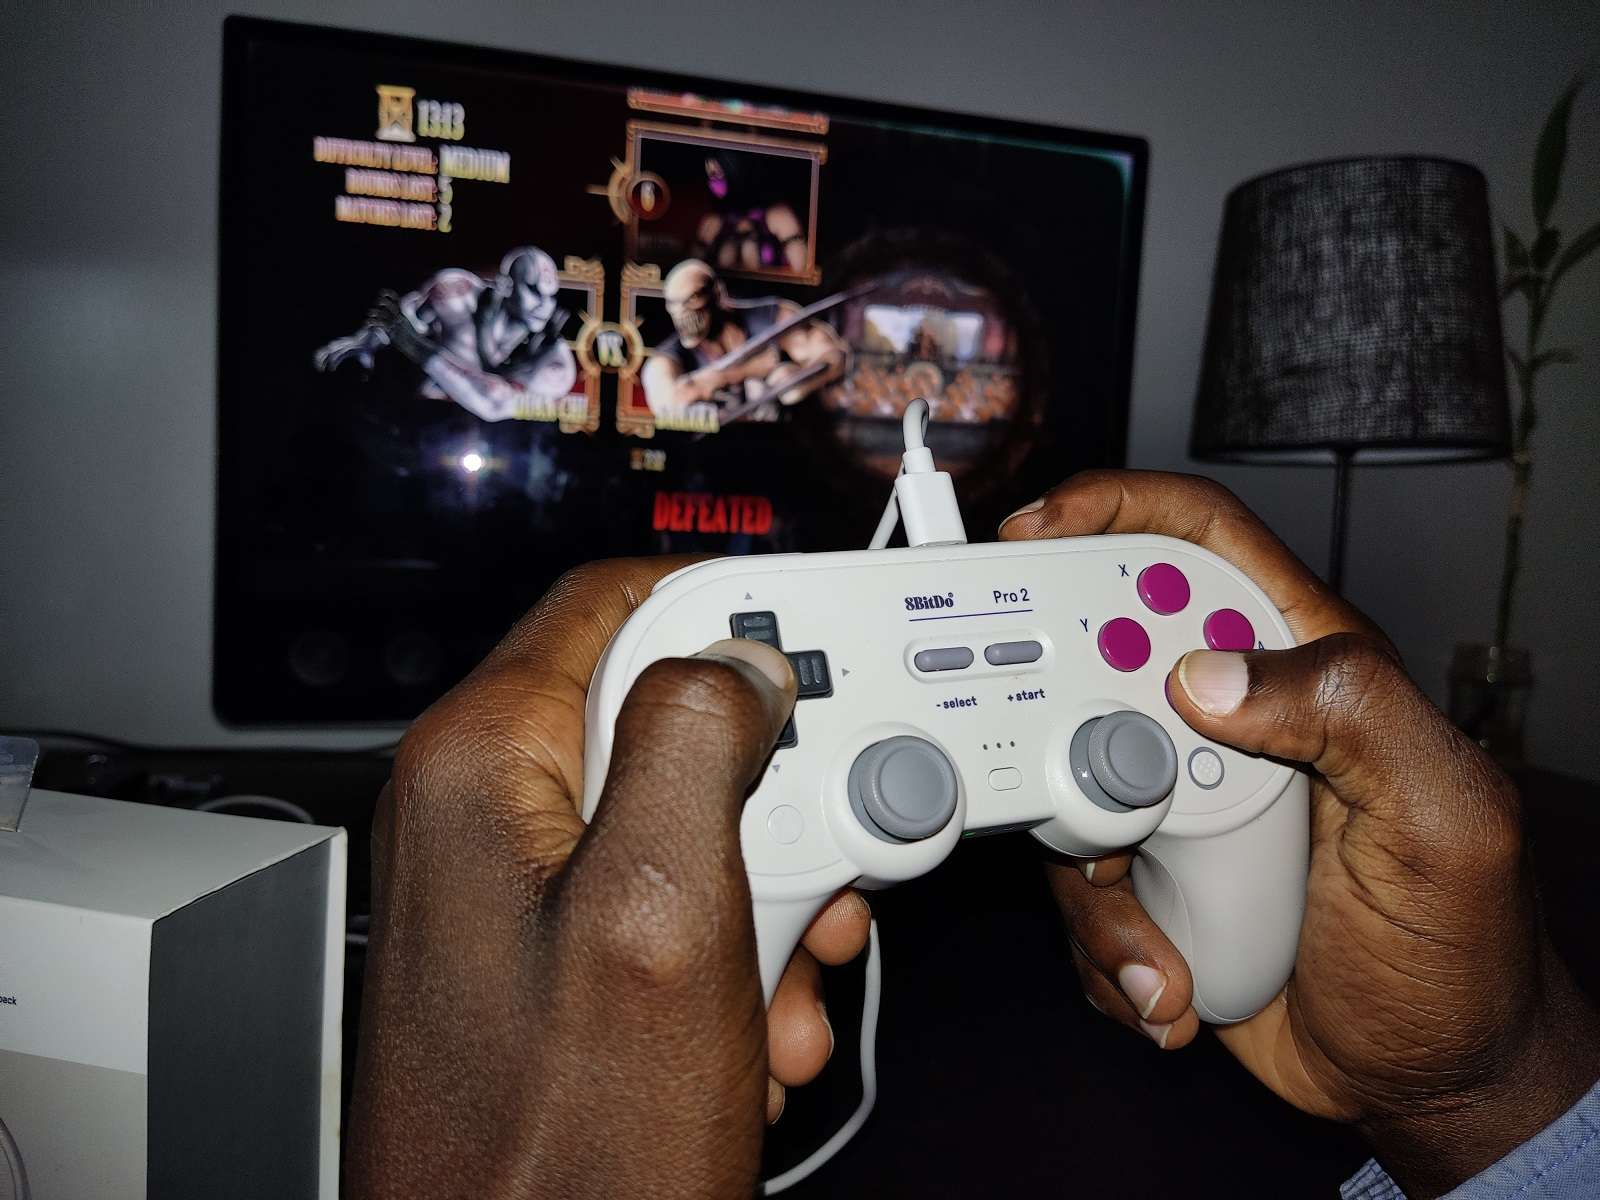 The best gaming controller for most systems: The 8BitDo Pro 2